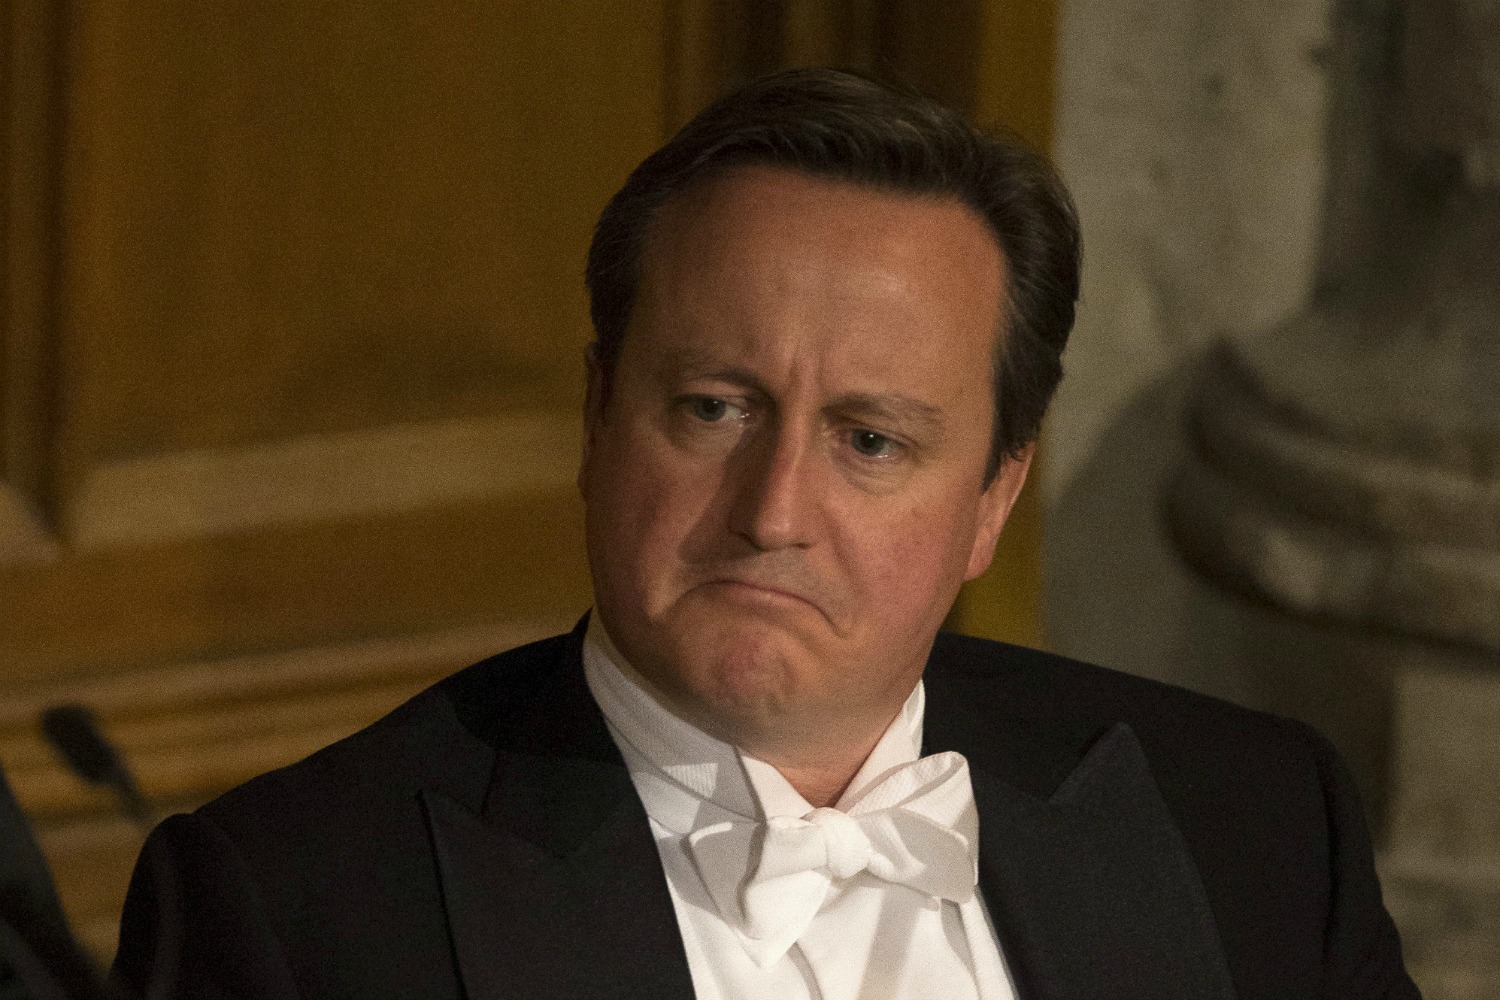 Cameron promises to end with ISIS just as was done with Hitler